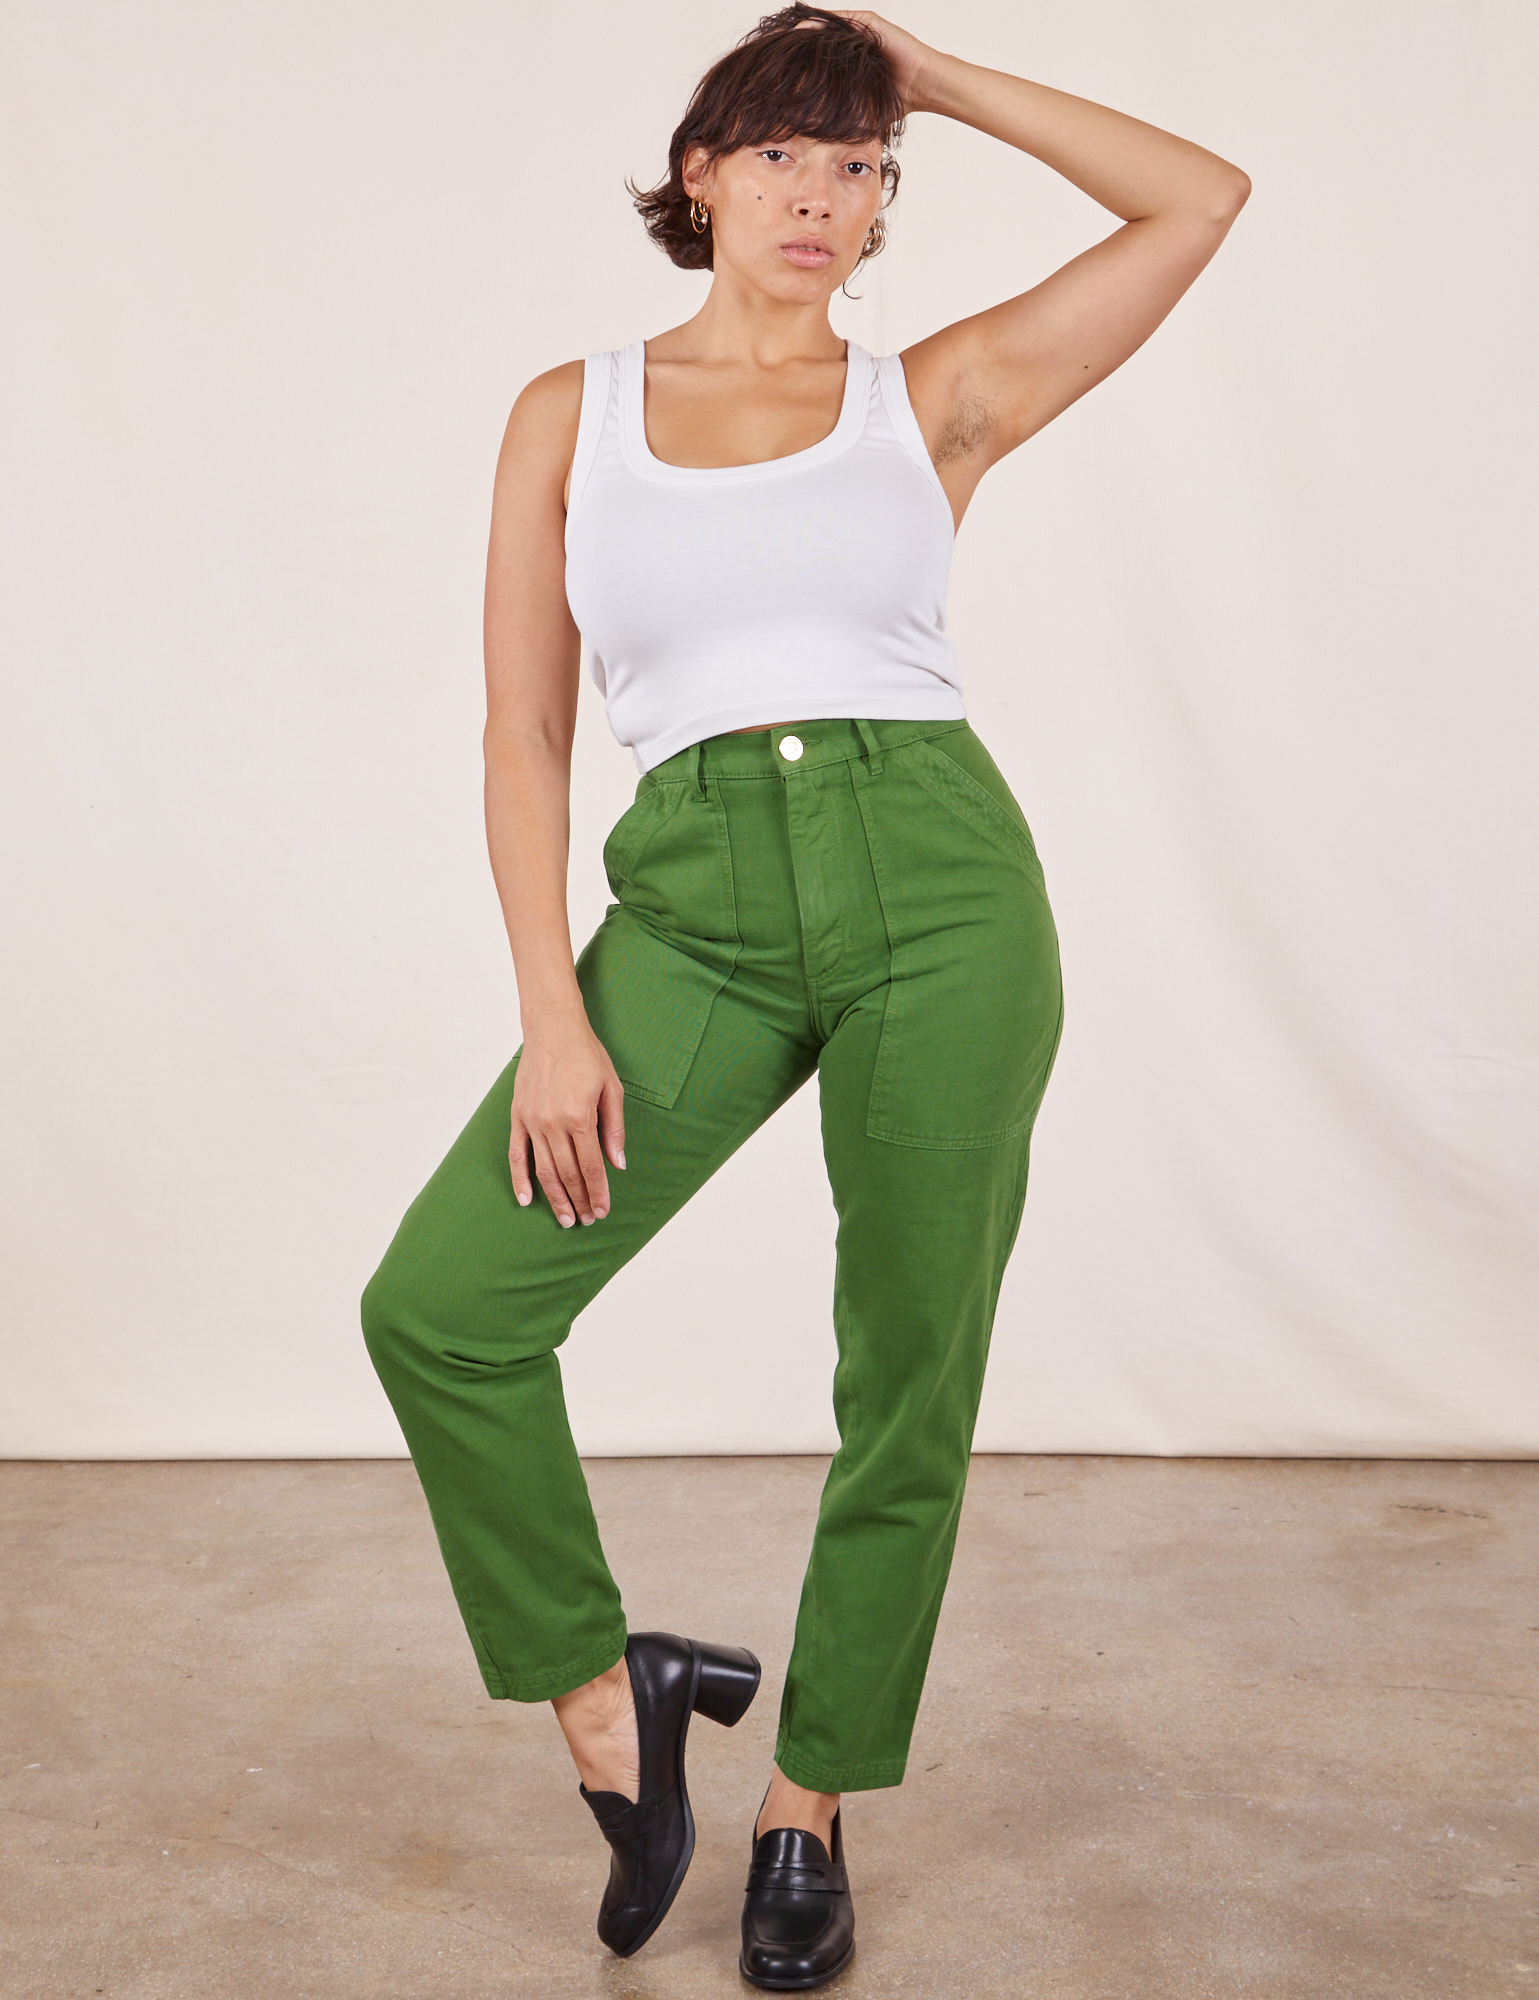 Tiara is 5&#39;4&quot; and wearing XS Pencil Pants in Lawn Green paired with Cropped Tank Top in vintage tee off-white